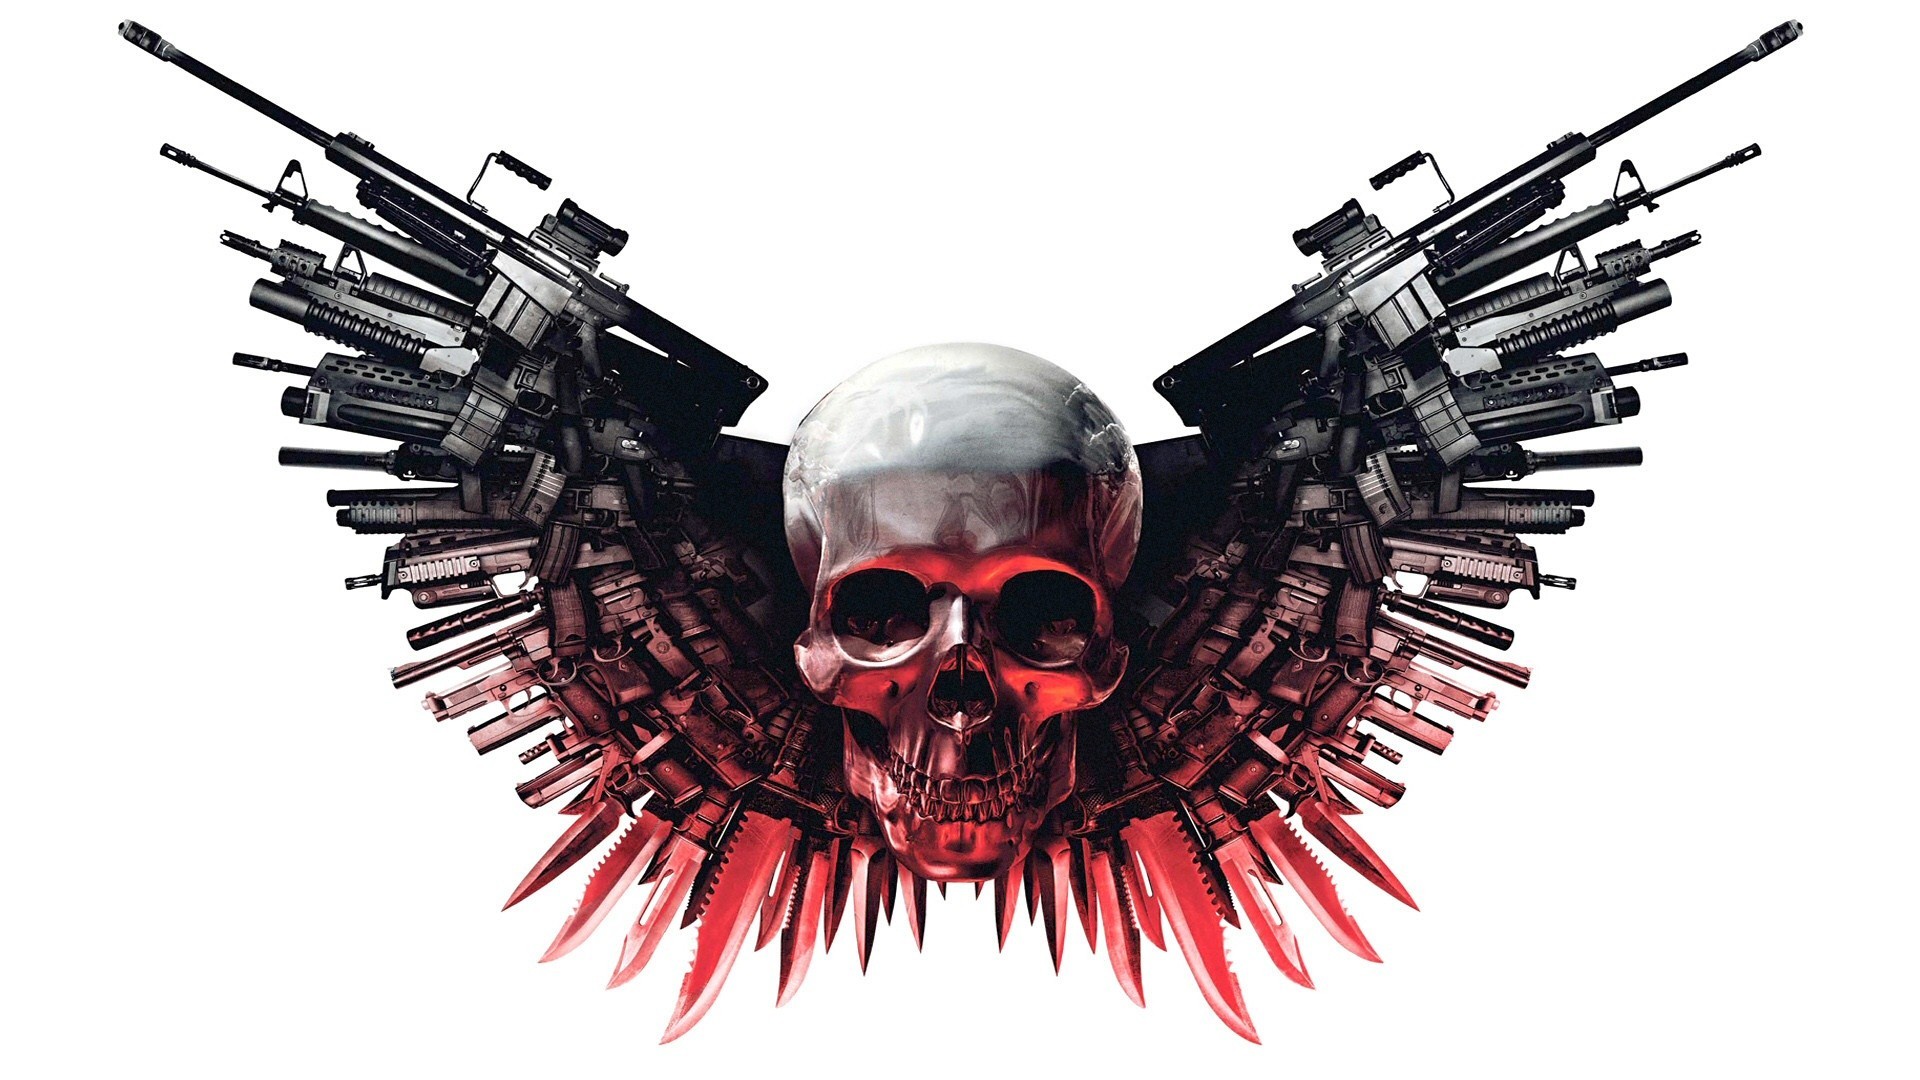 The Expendables Weapon Gun Skull 1920x1080